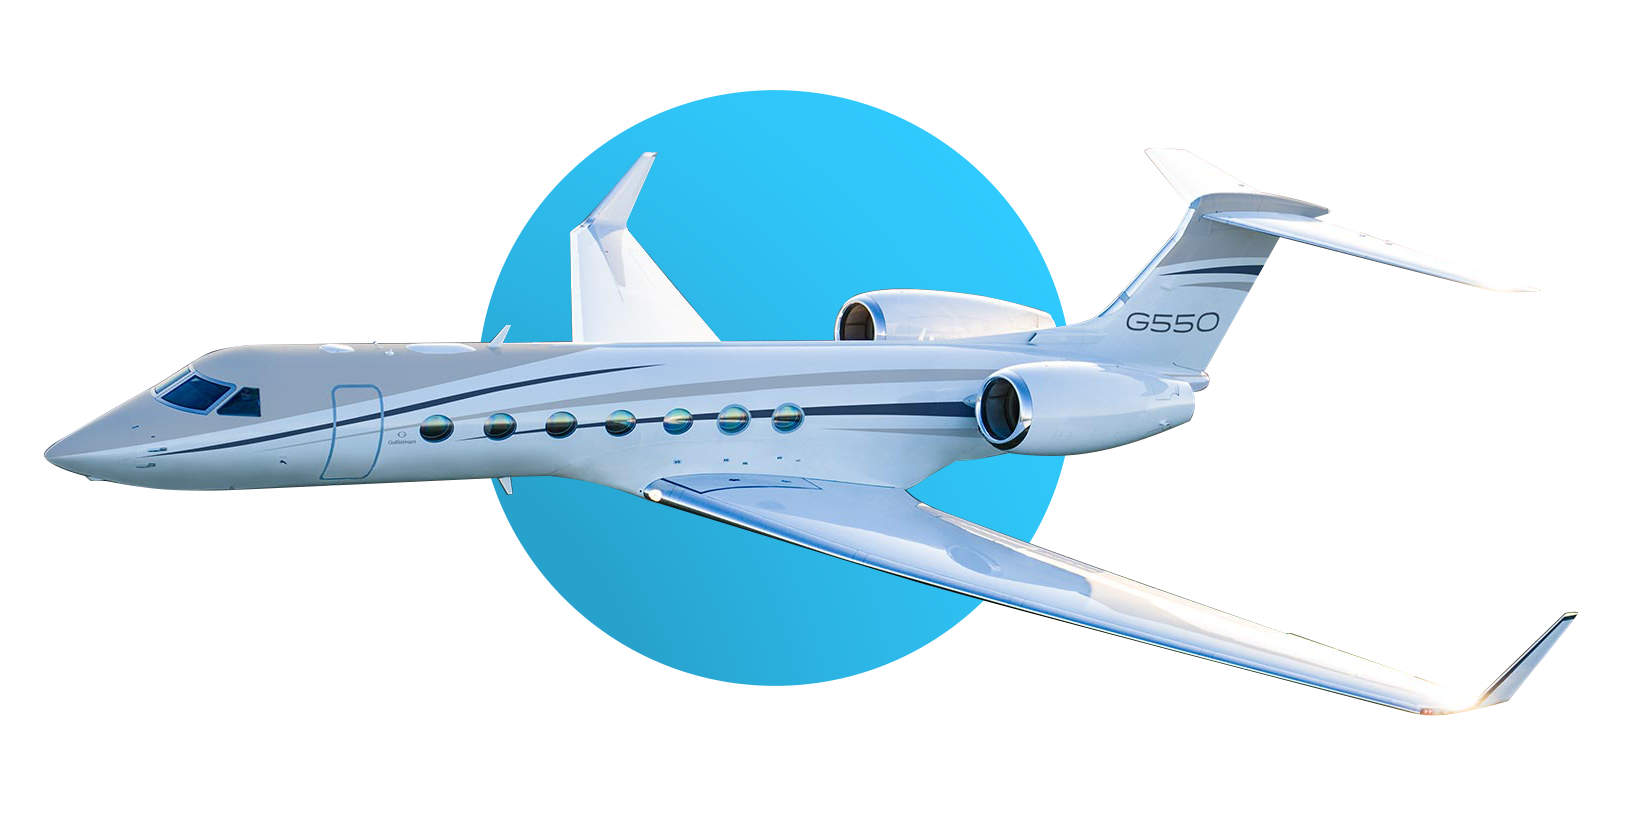 Gulsftream G550 aircraft with Leviate's blue brand circle behind it.